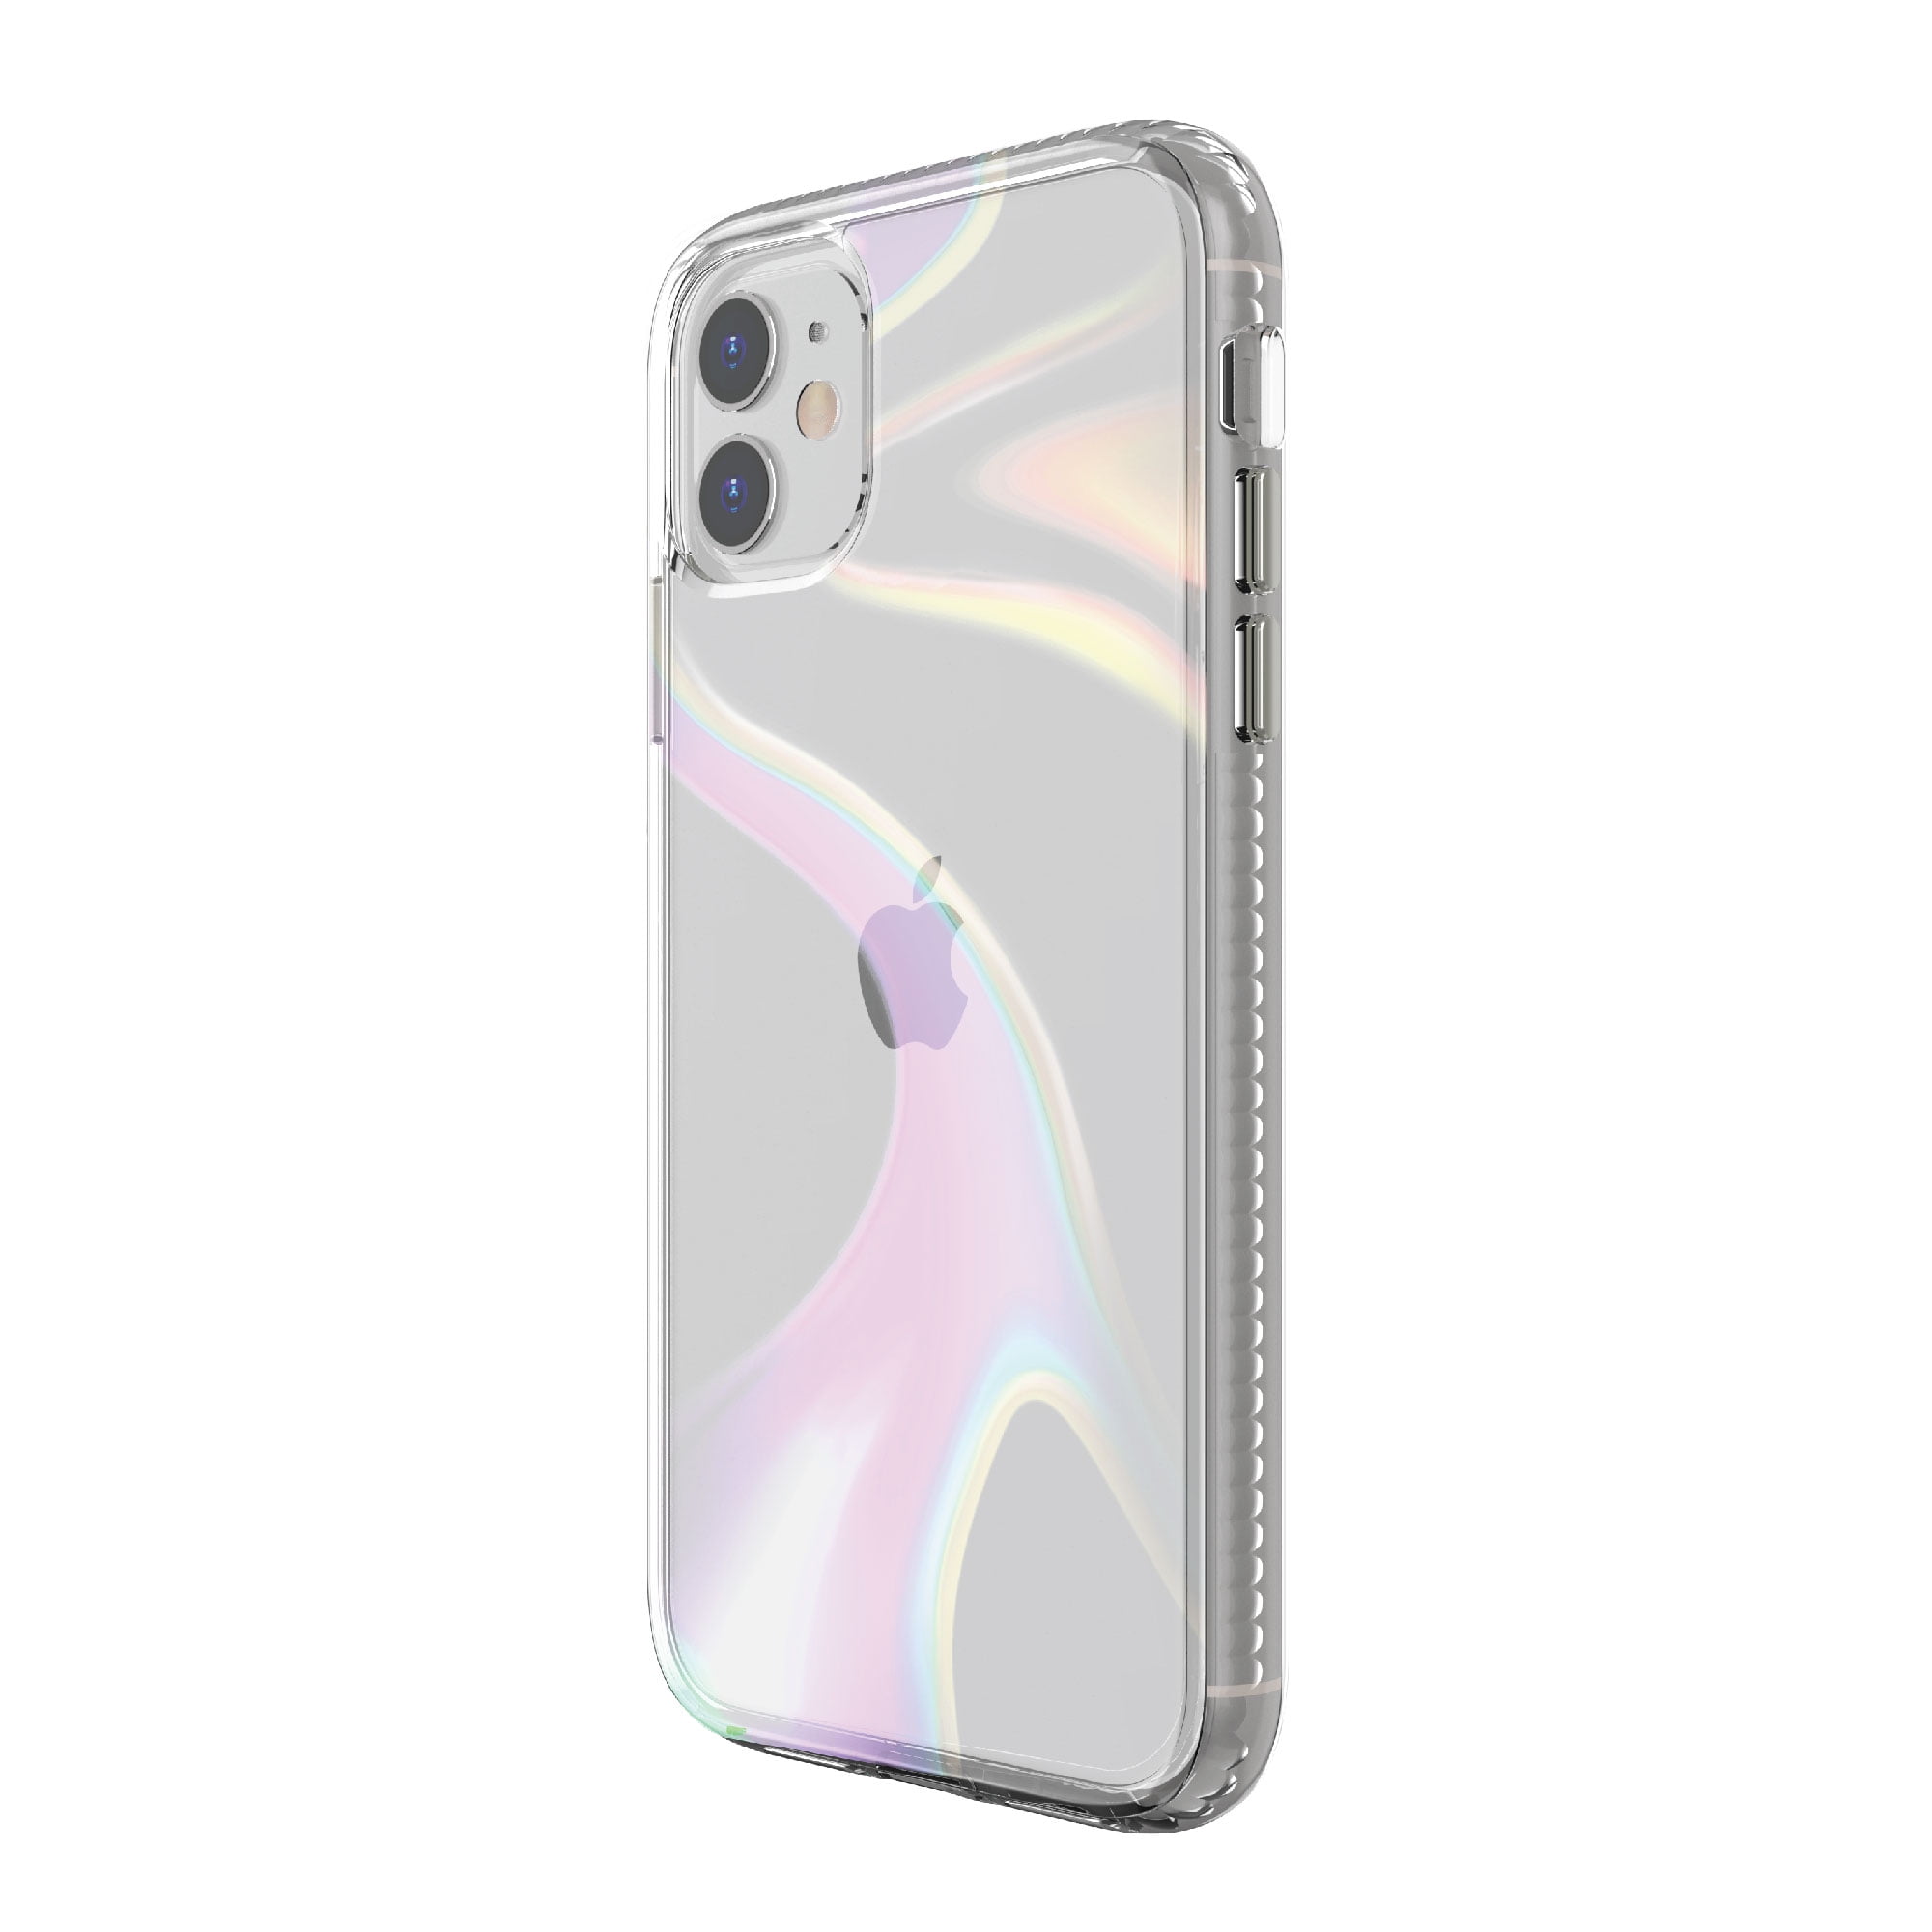 onn. White Metallic Floral Phone Case for iPhone 11 / iPhone XR